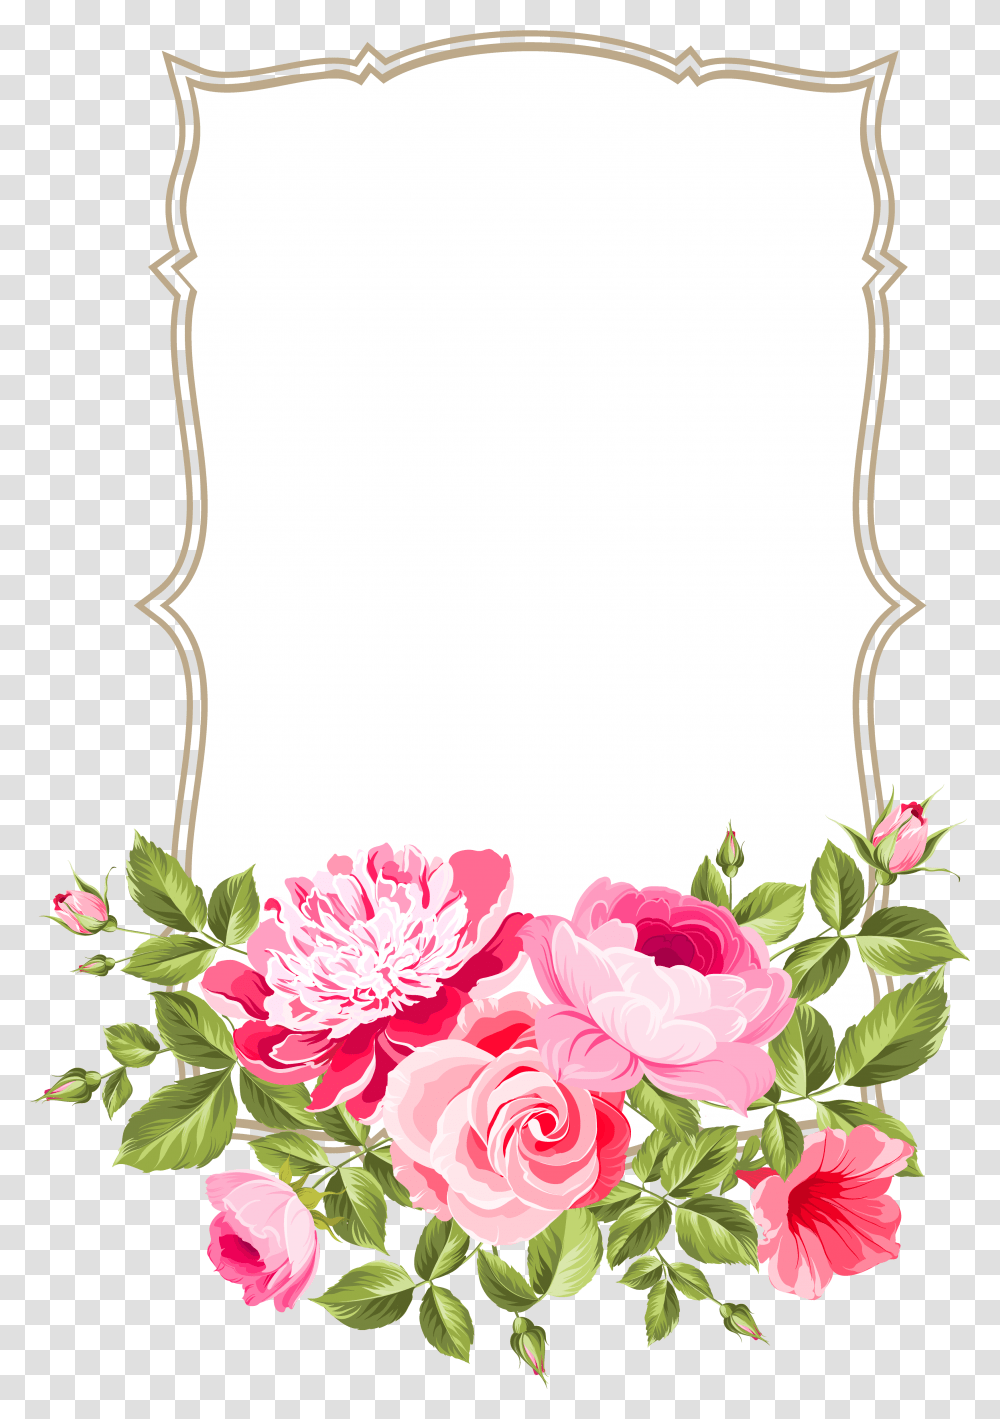 Library Of Royalty Free Download Flower Garland Flowers Garland, Plant, Blossom, Floral Design, Pattern Transparent Png